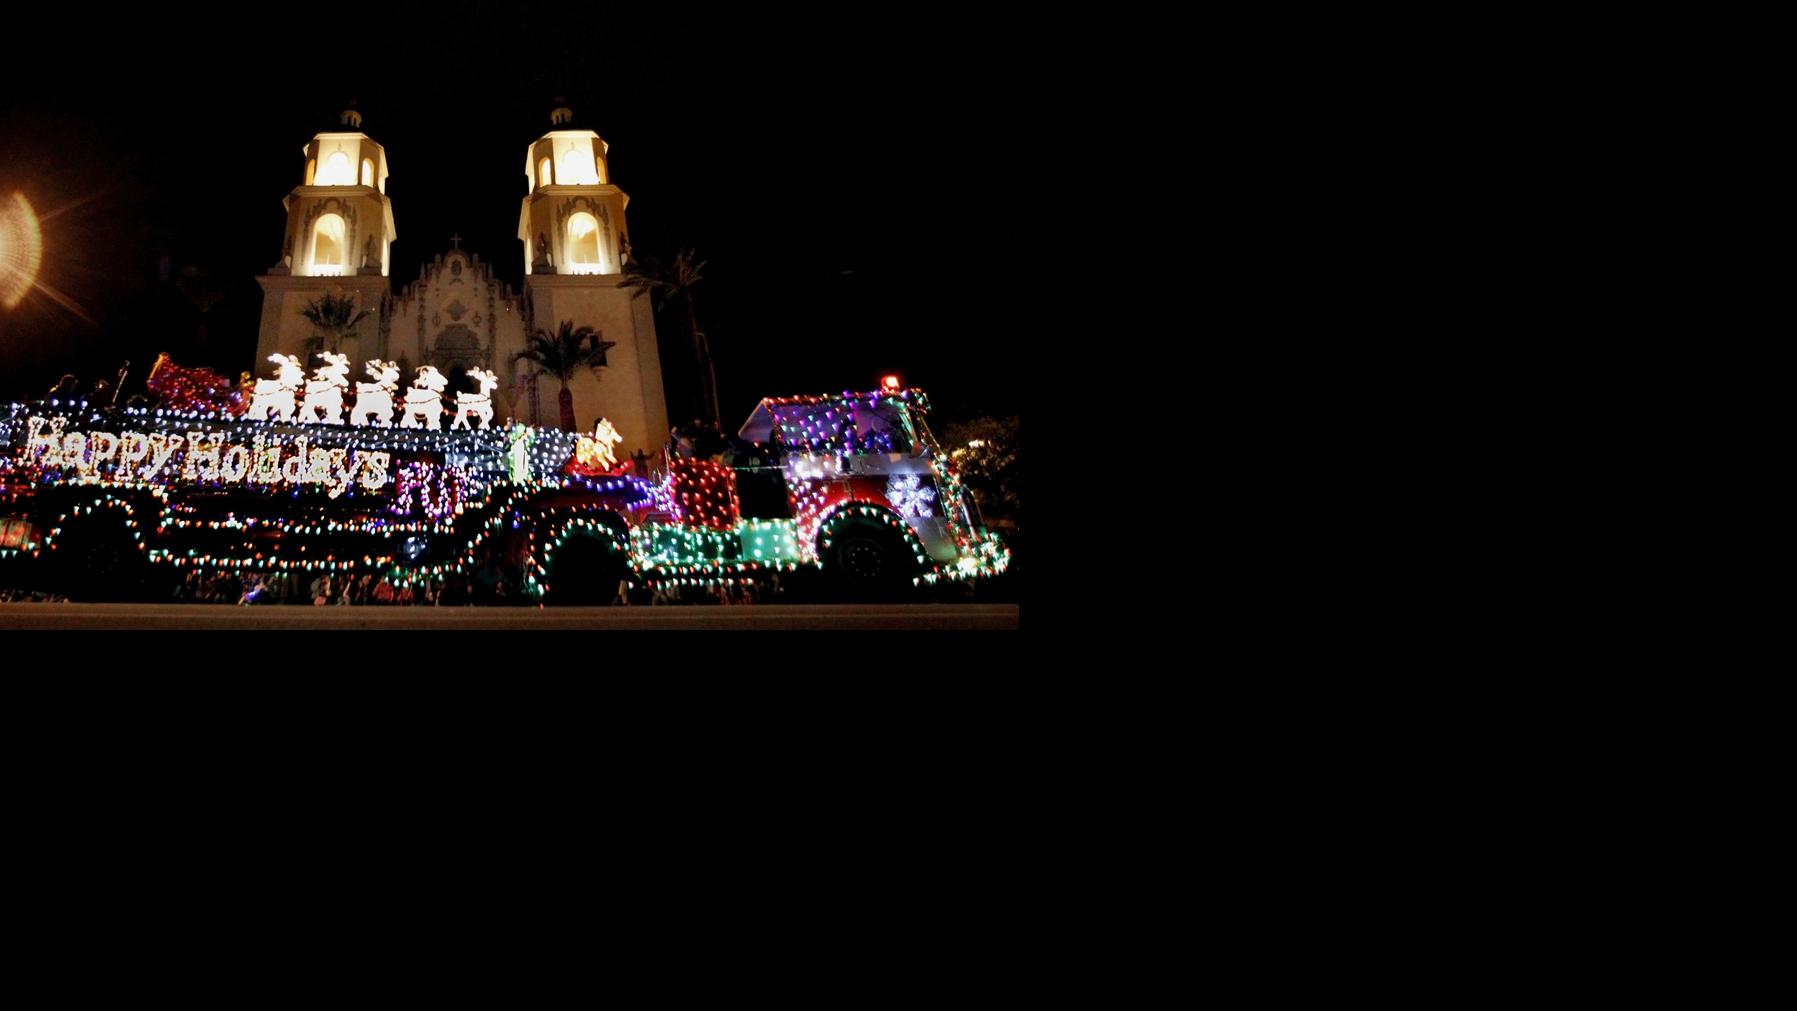 Tucson's Parade of Lights and festival is THIS weekend tucson life